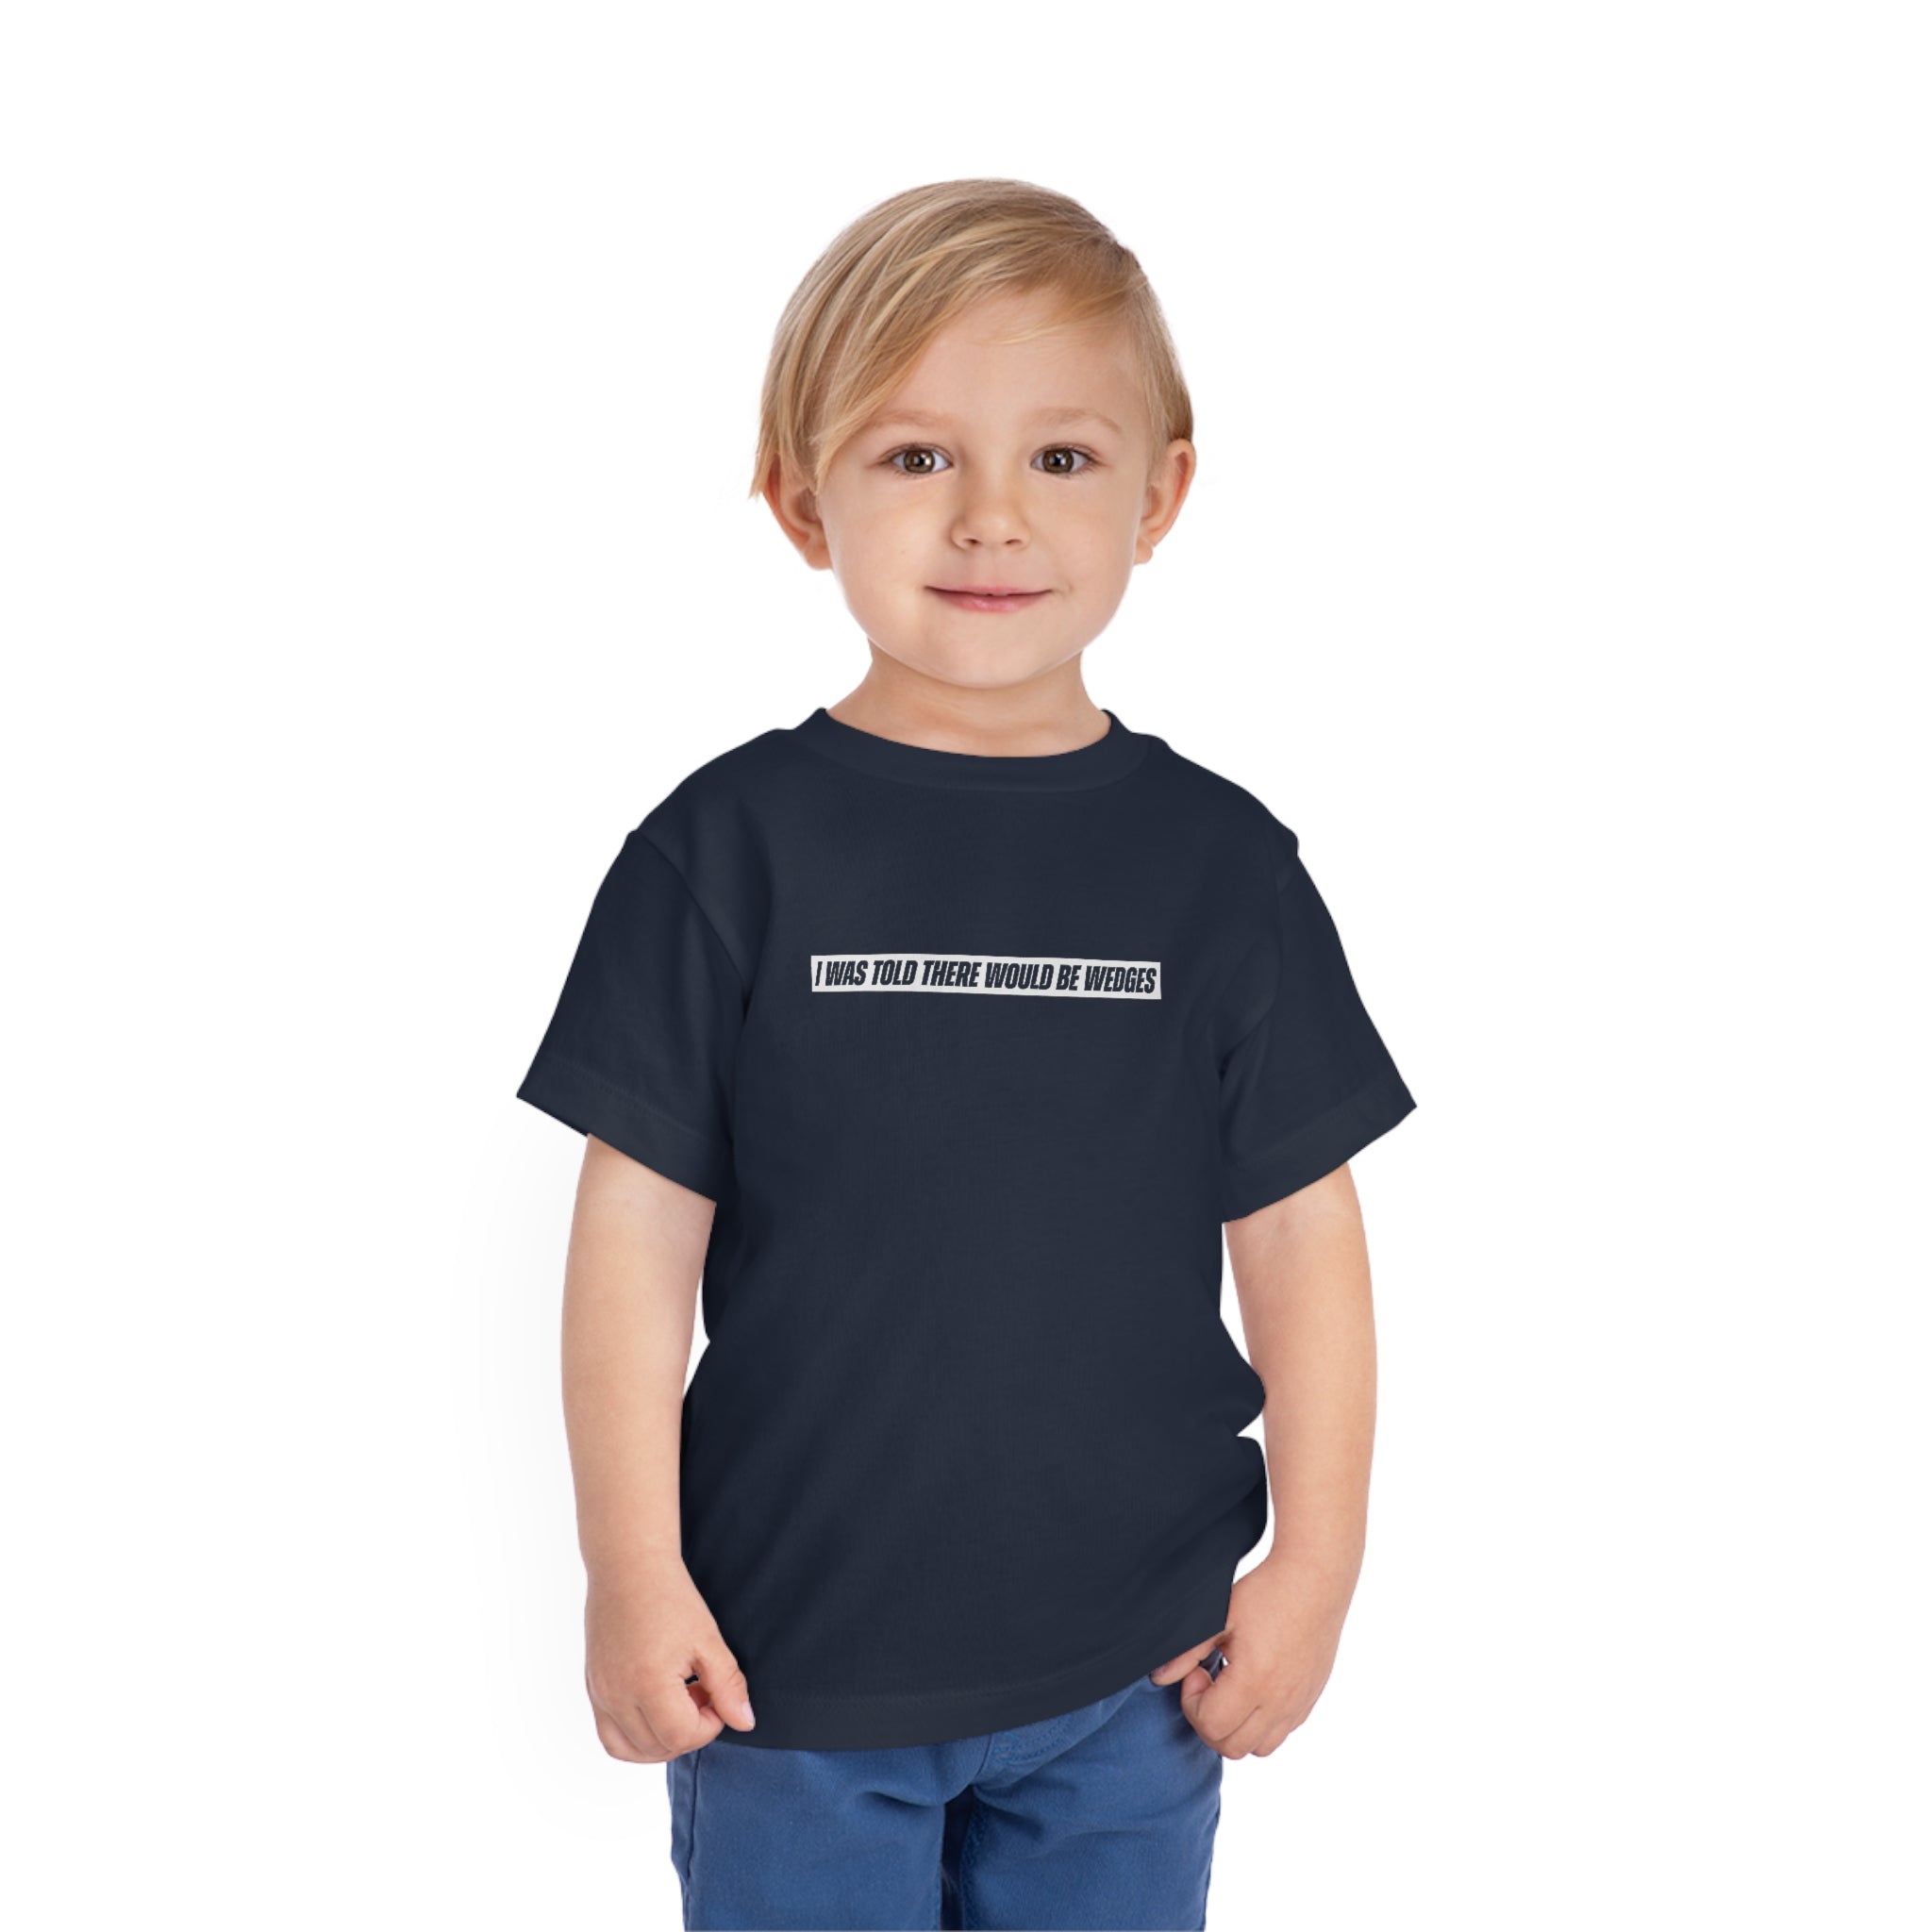 I Was Told There Would Be Wedges Toddler Tee 